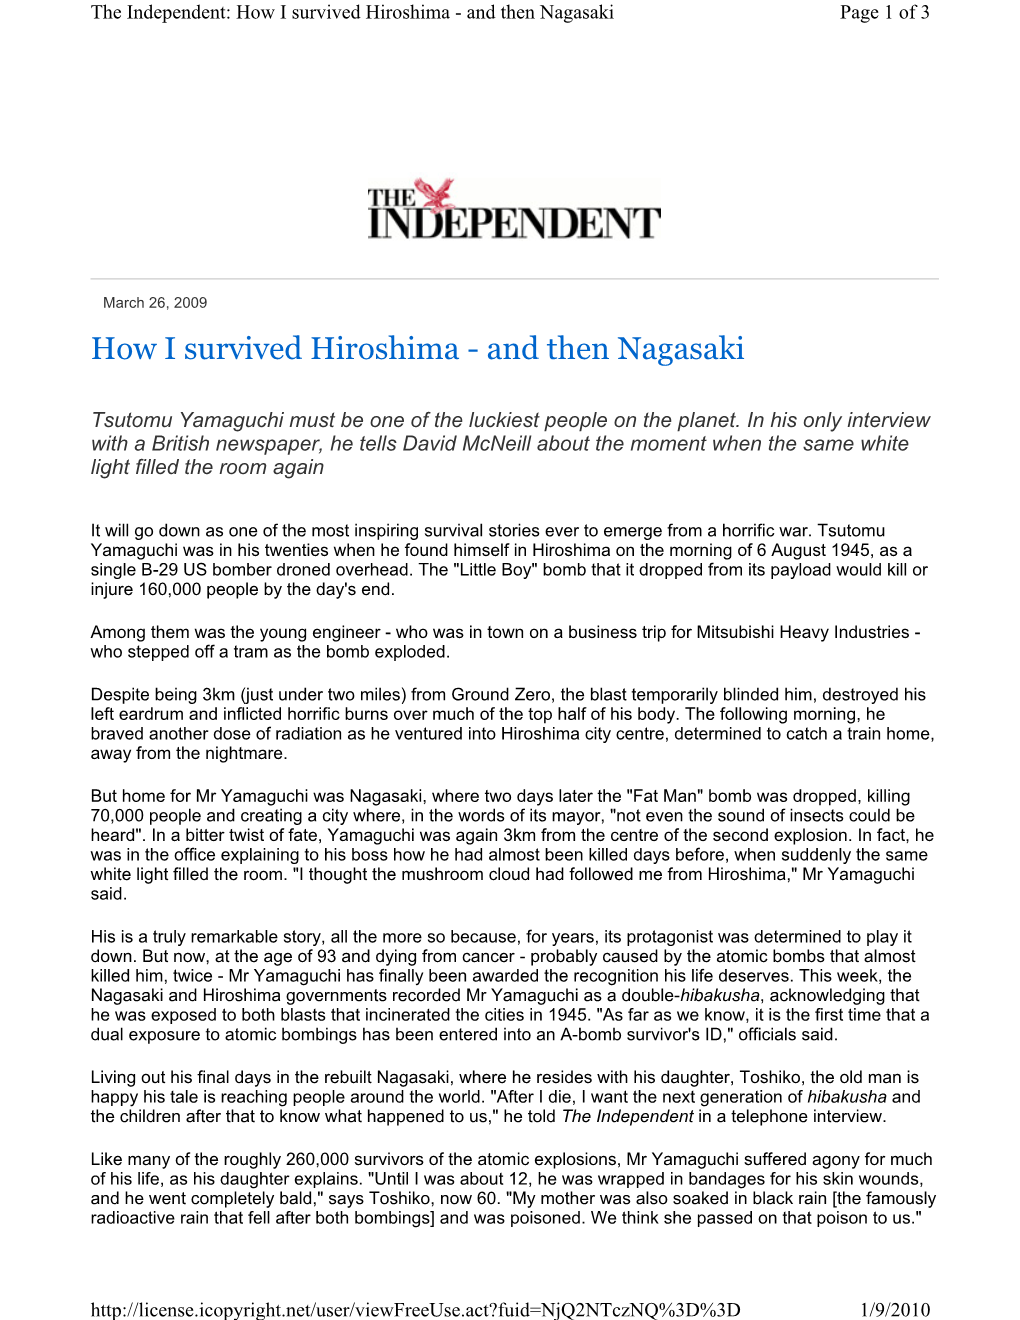 How I Survived Hiroshima - and Then Nagasaki Page 1 of 3